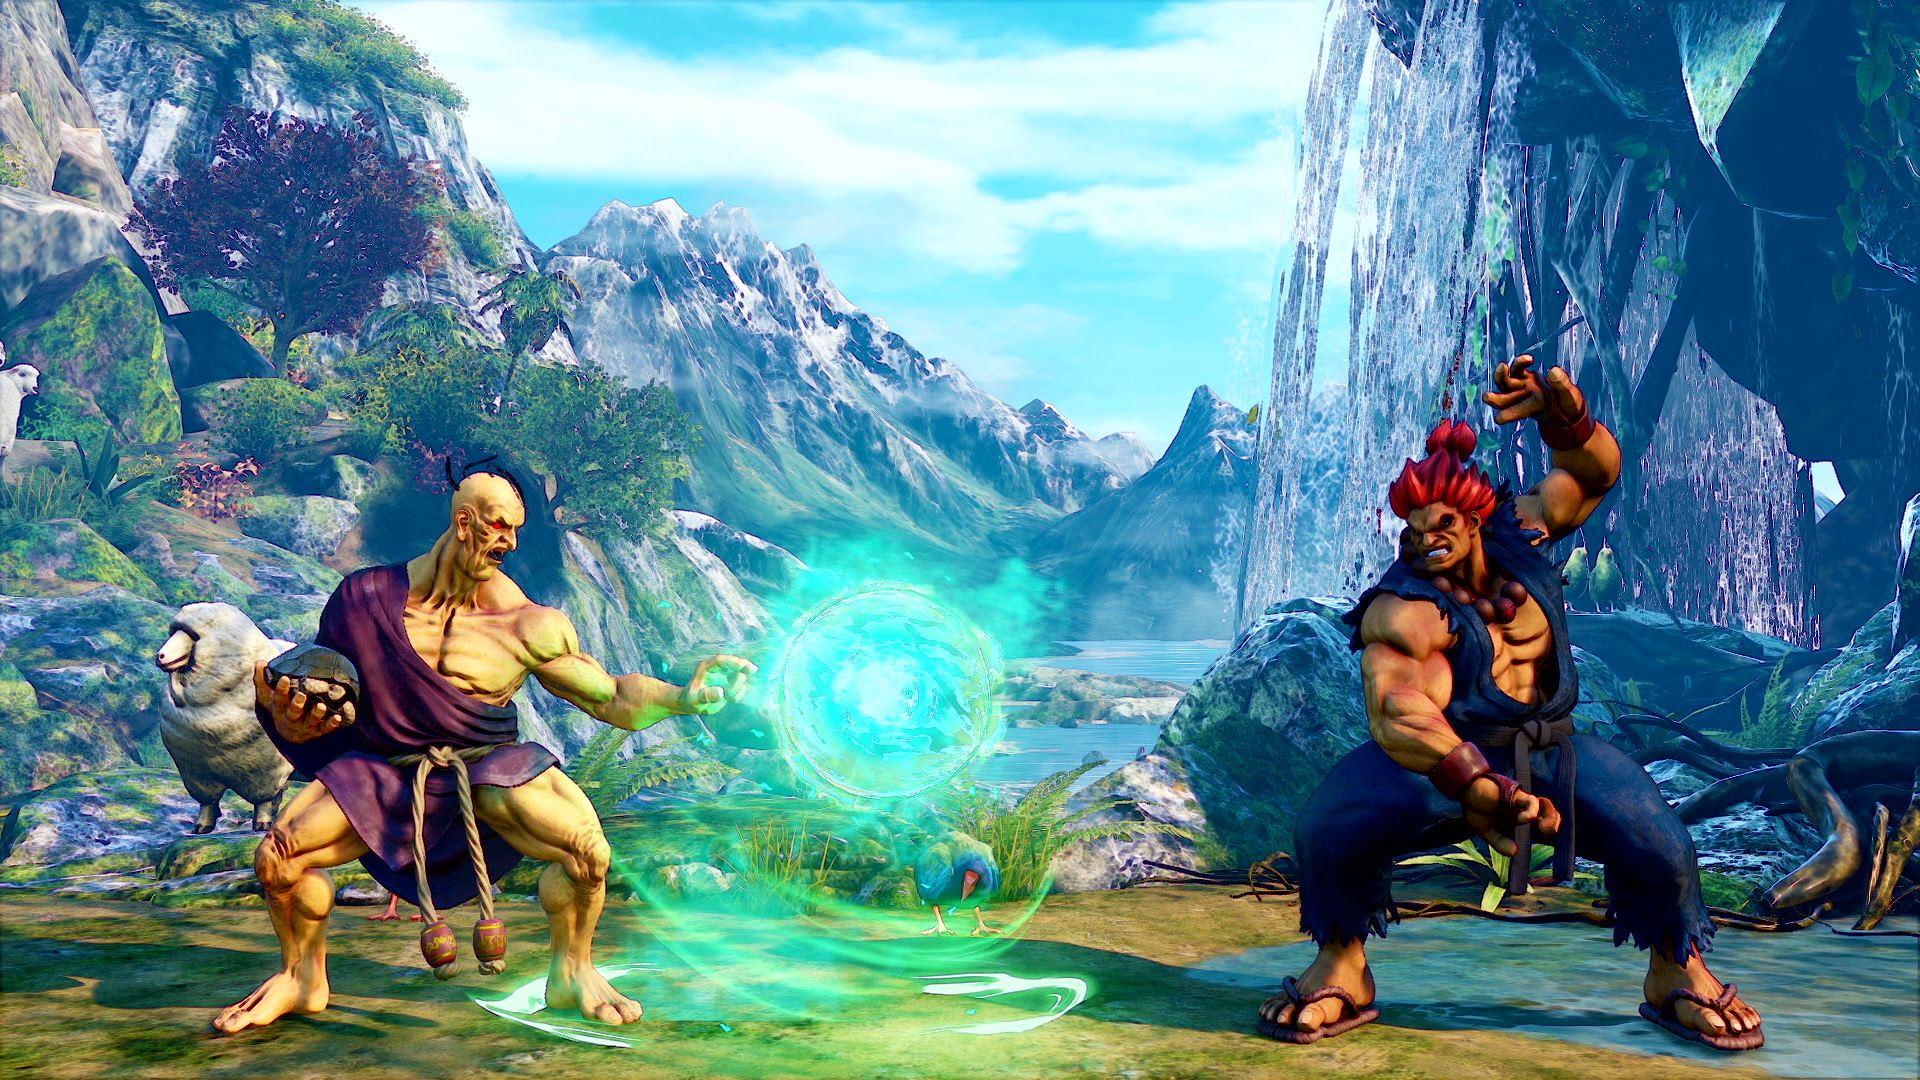 New Street Fighter 5 Characters Announced, Including Final Fight Debut